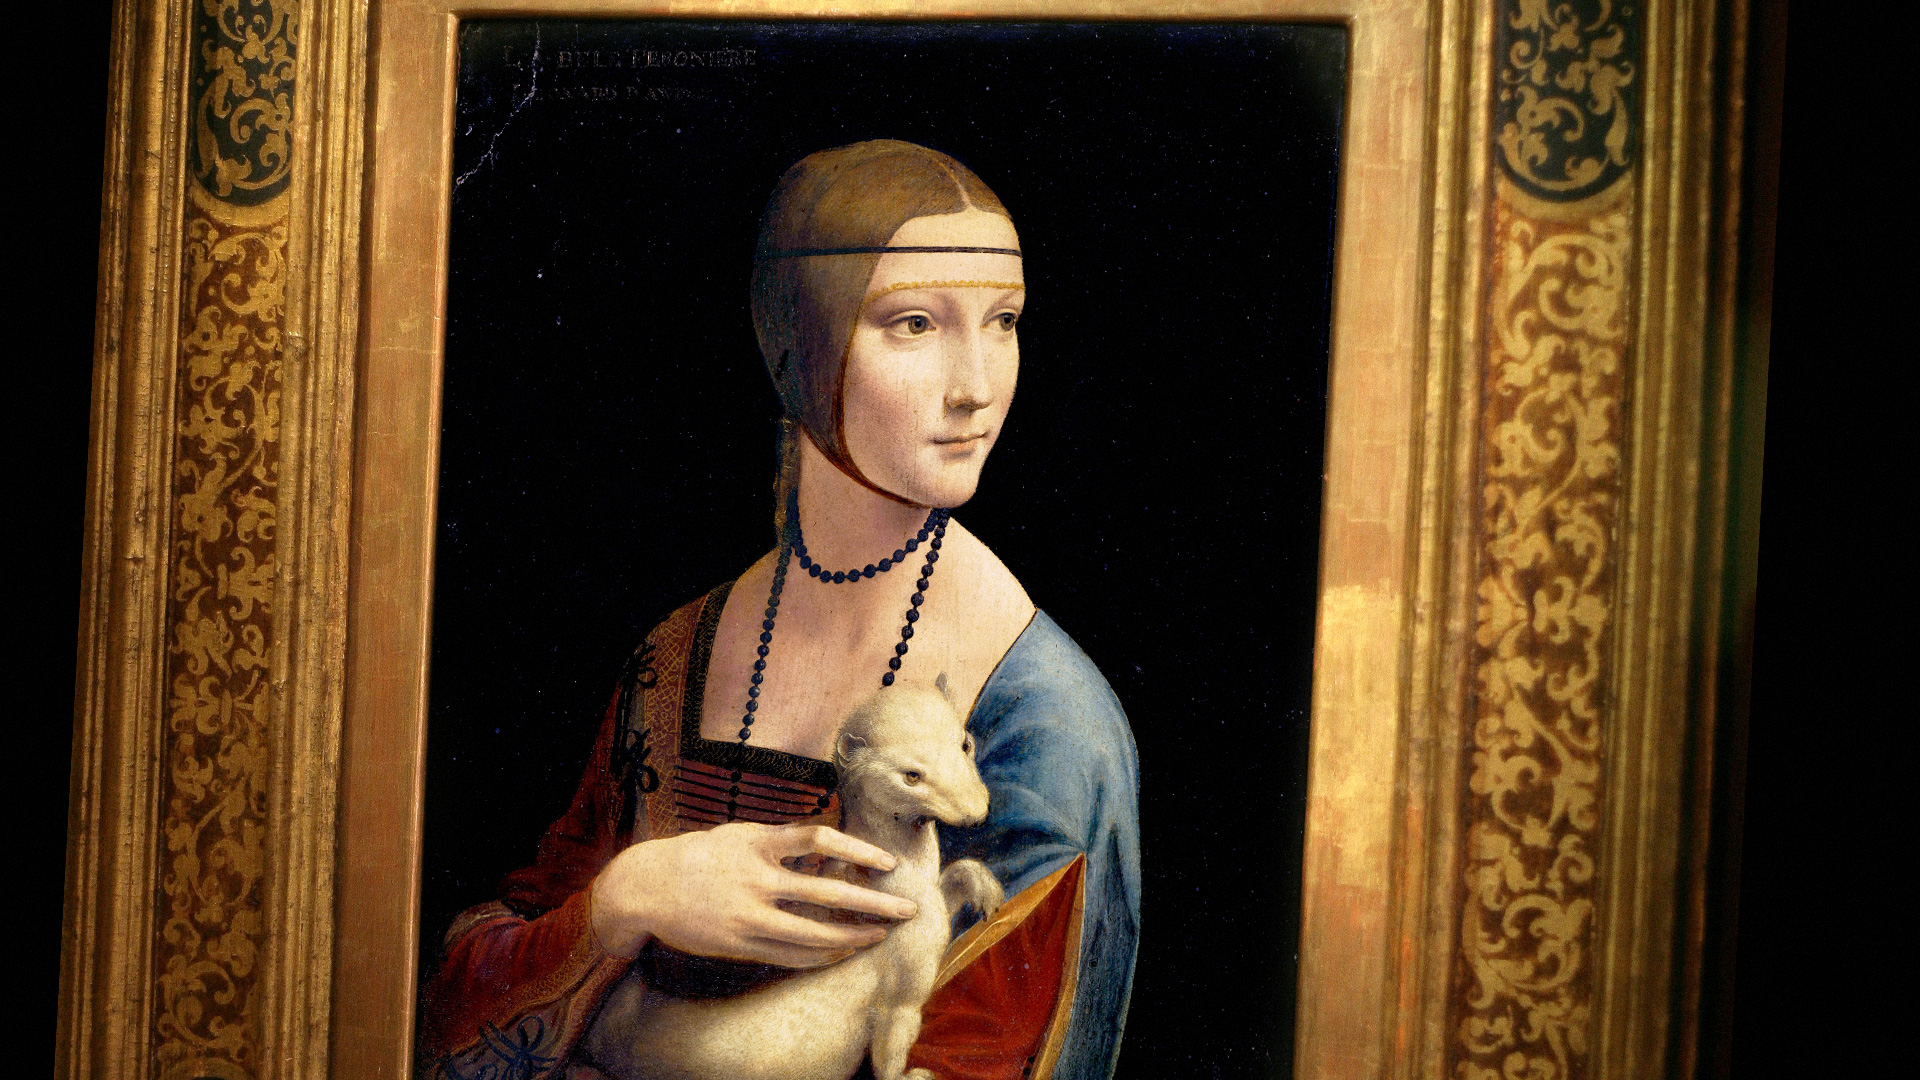 File:Portrait of a lady with ermine mantle - Schloss Arolsen.png -  Wikimedia Commons